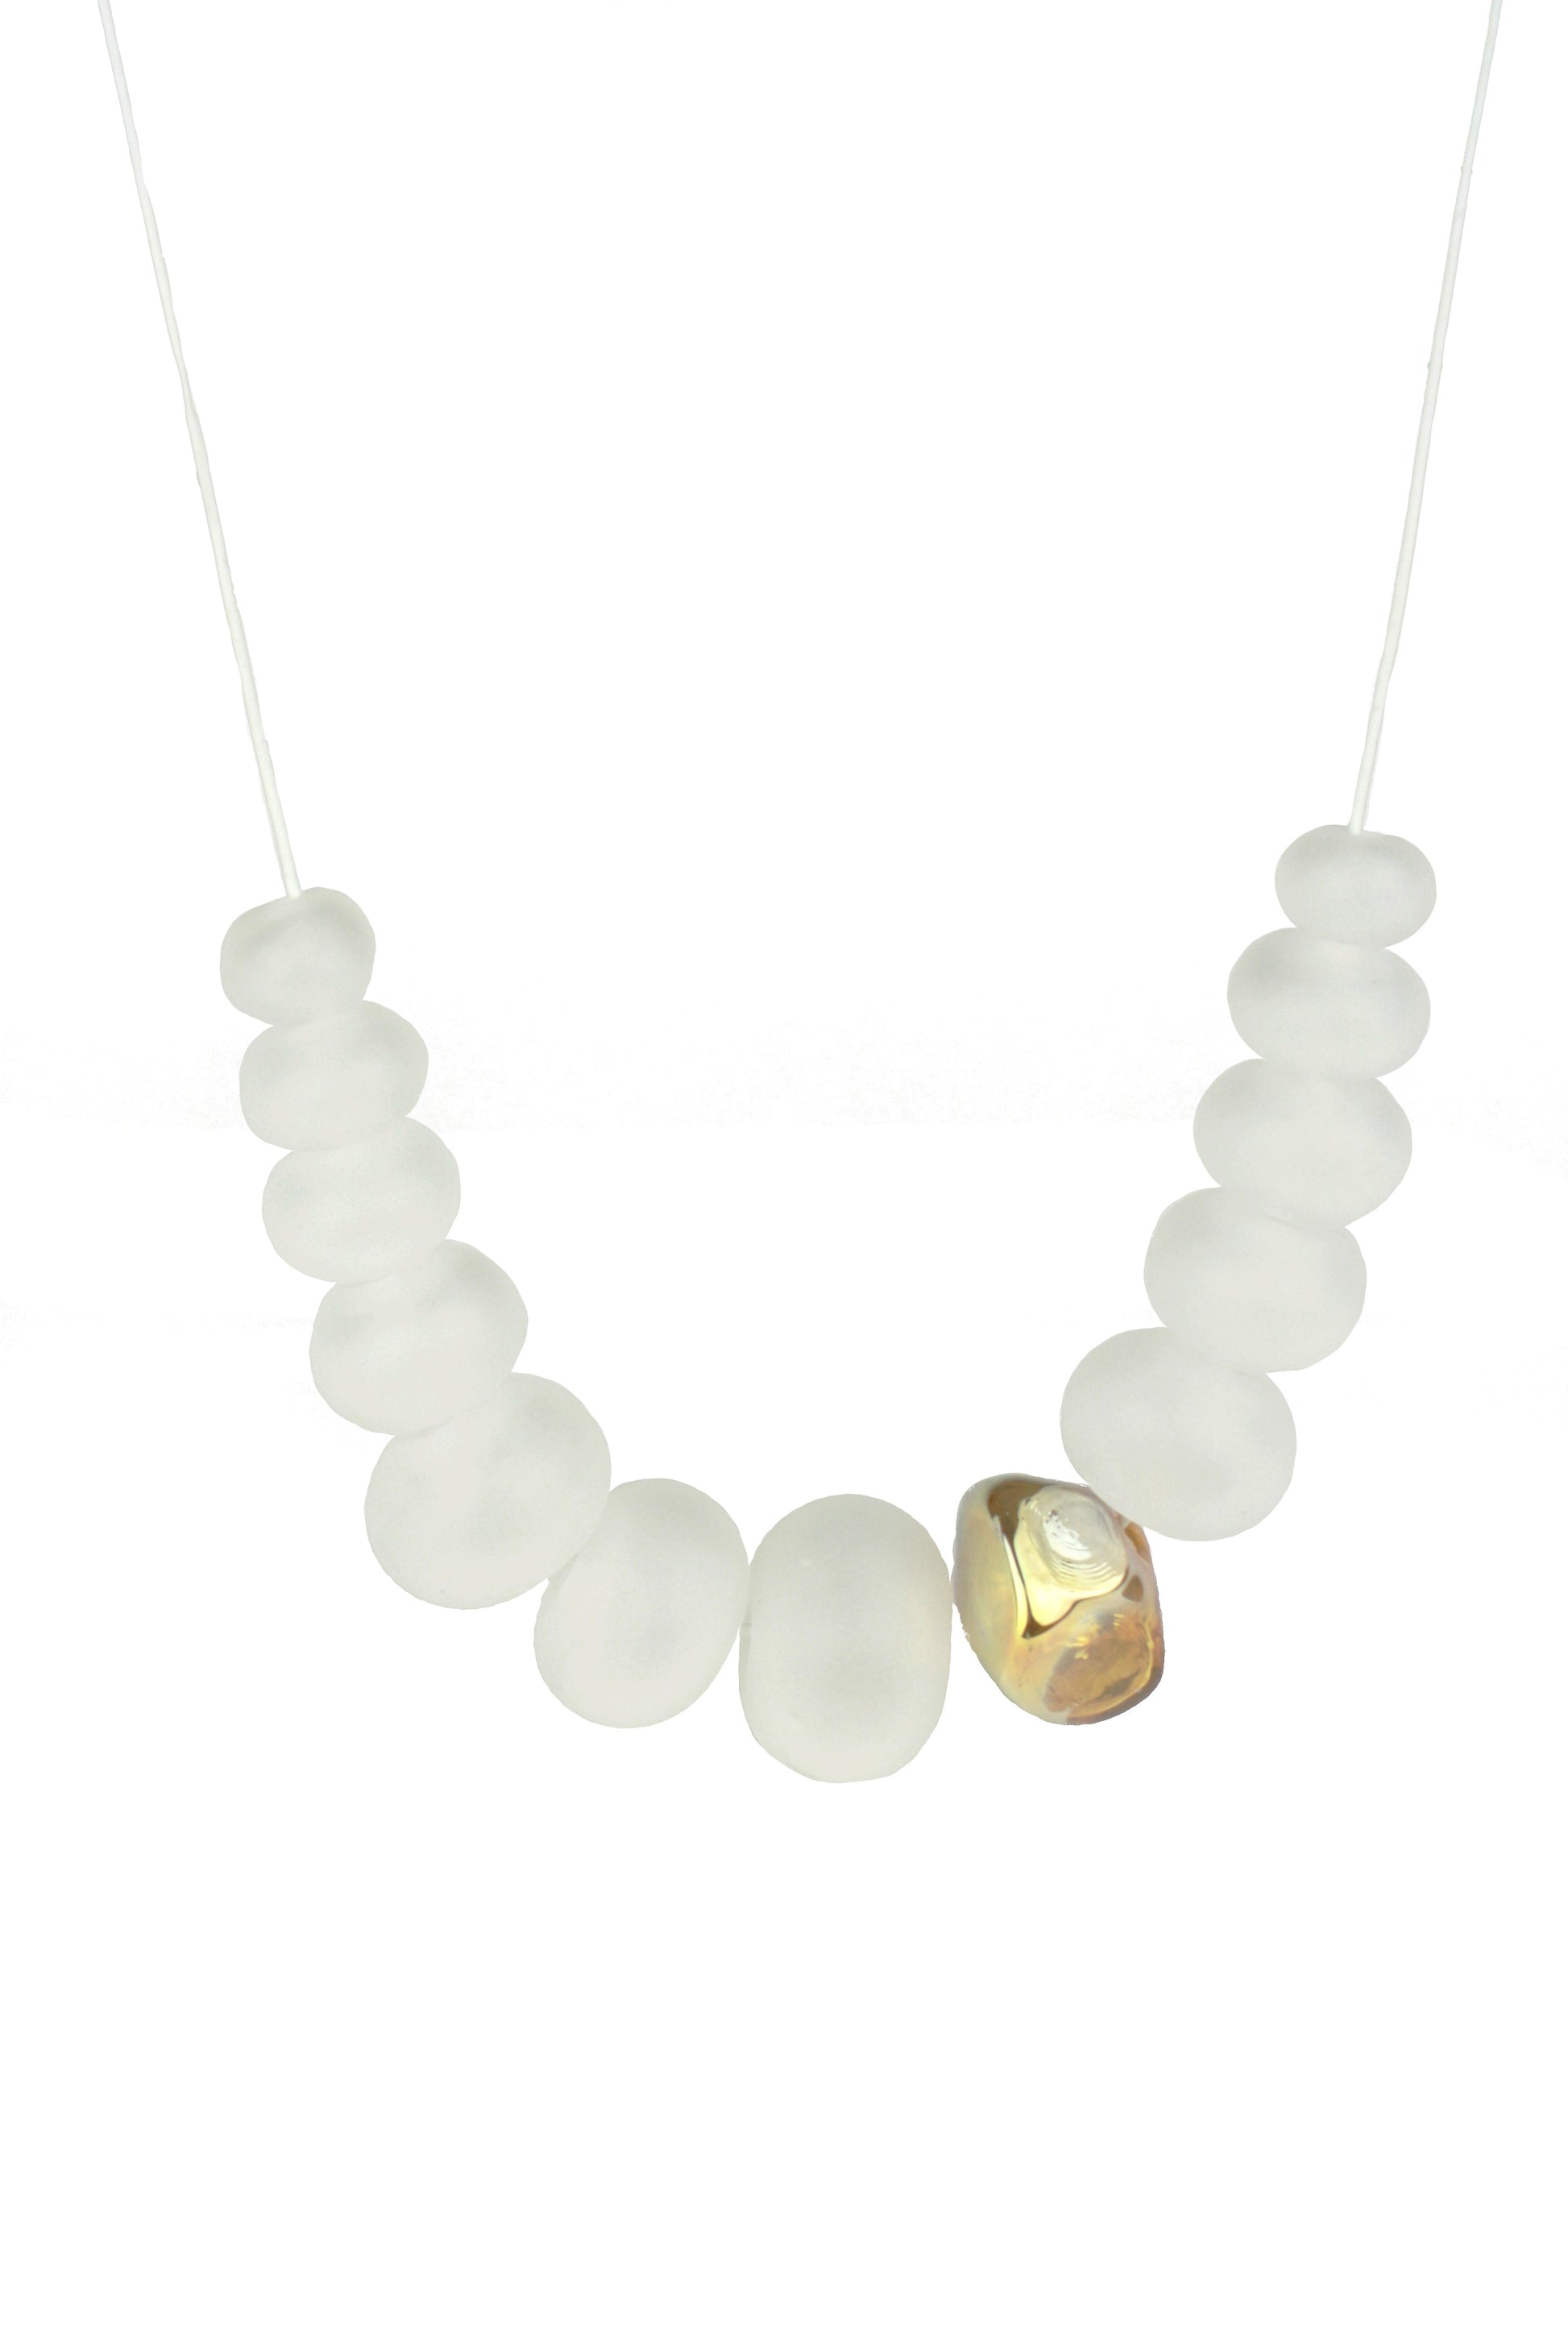 Necklace of hand blown and sandblasted hollow beads in soft white glass paired with a gold glass nugget bead and strung on adjustable leather